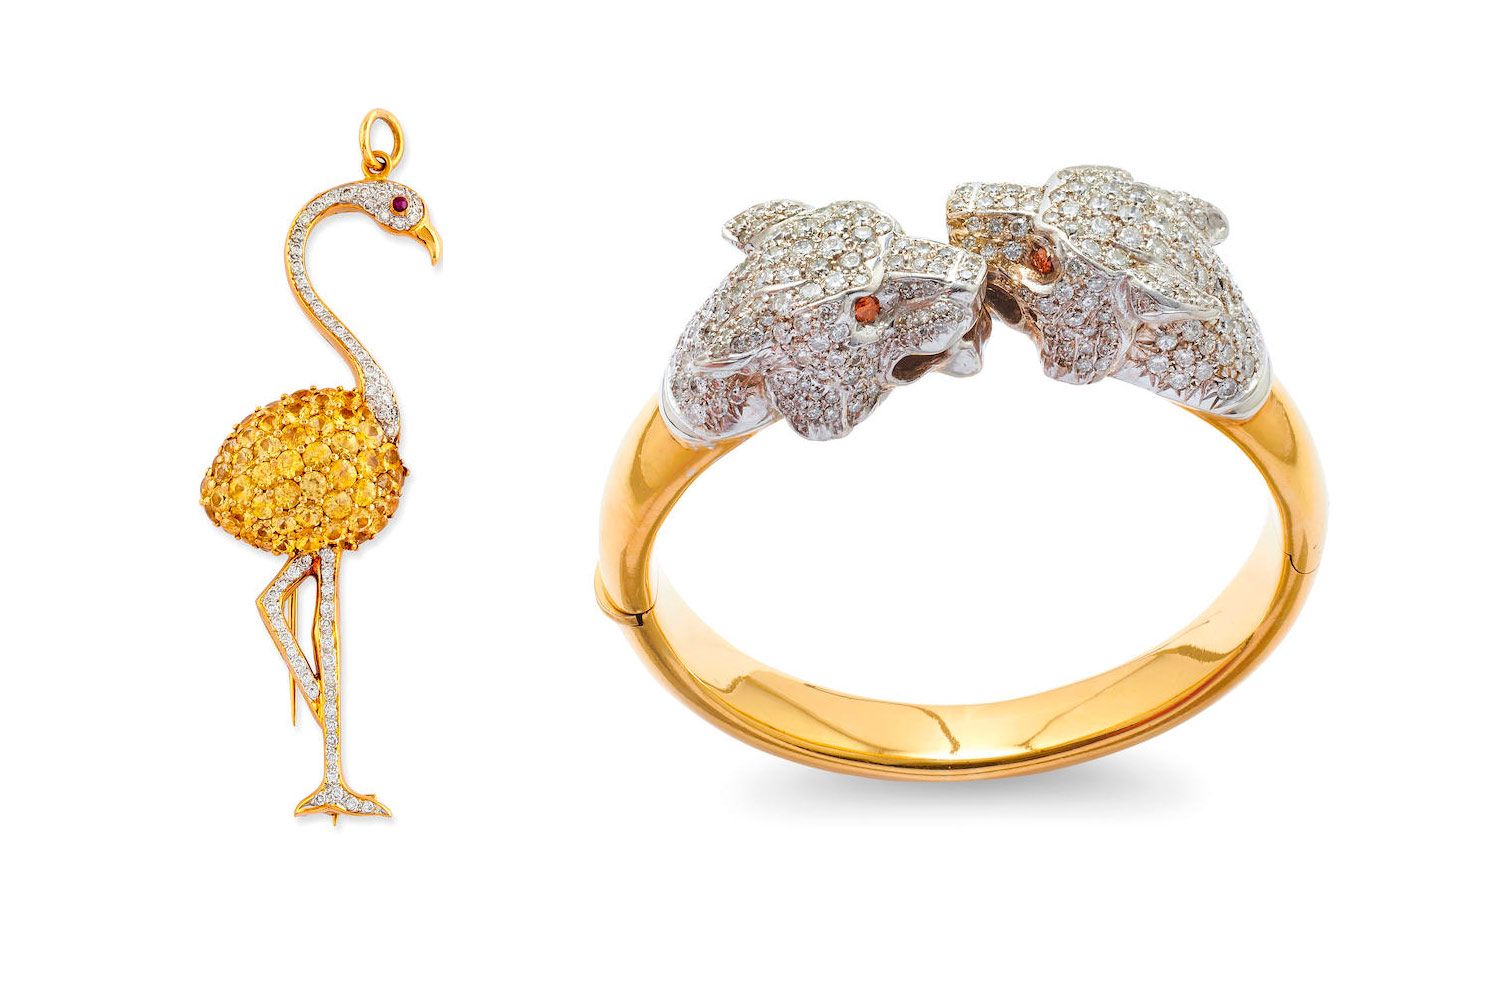 Two pieces due to be sold by Bonhams in November 2021 including a Tiffany & Co. yellow sapphire and diamond pendant-brooch in the shape of a flamingo and a diamond bangle bracelet decorated with two panther heads